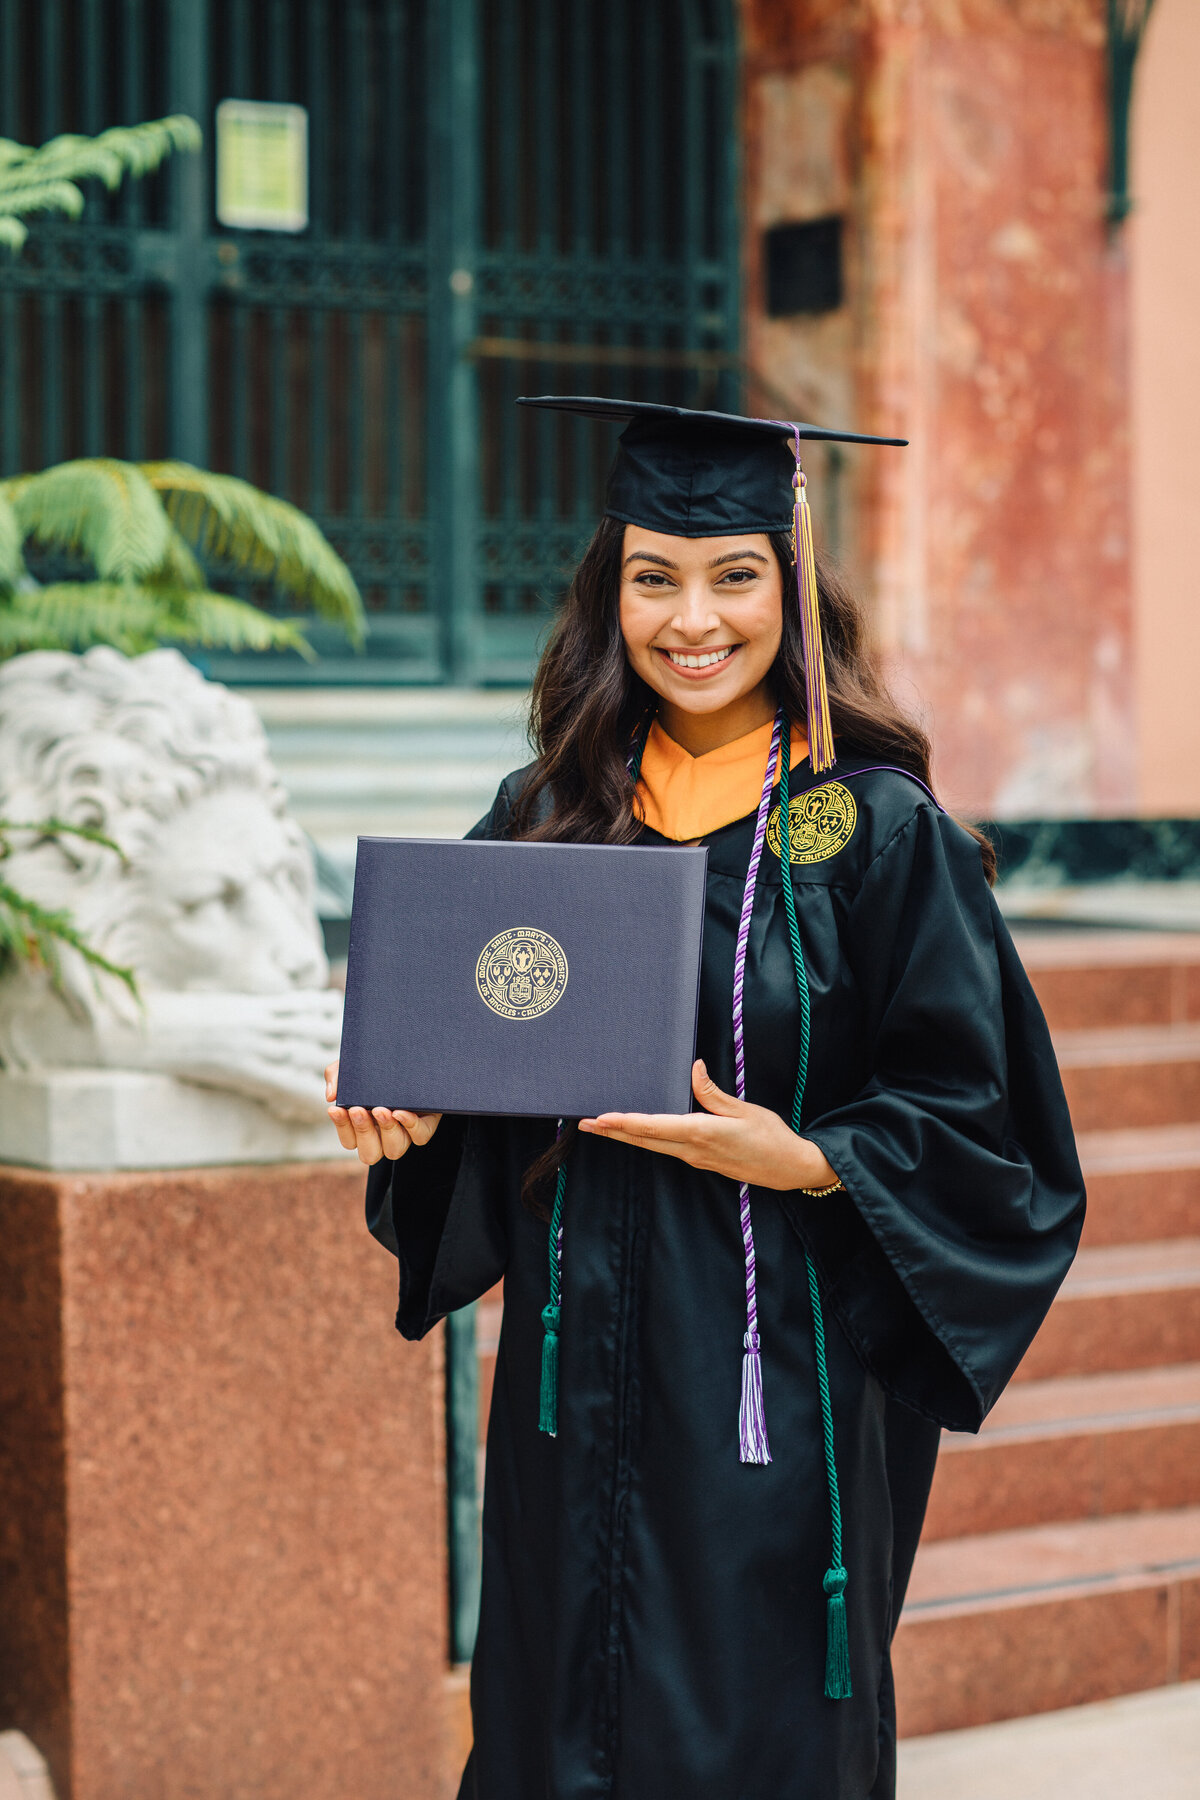 Graduation Portrait Of Young Woman Showing Her Diploma Los Angeles